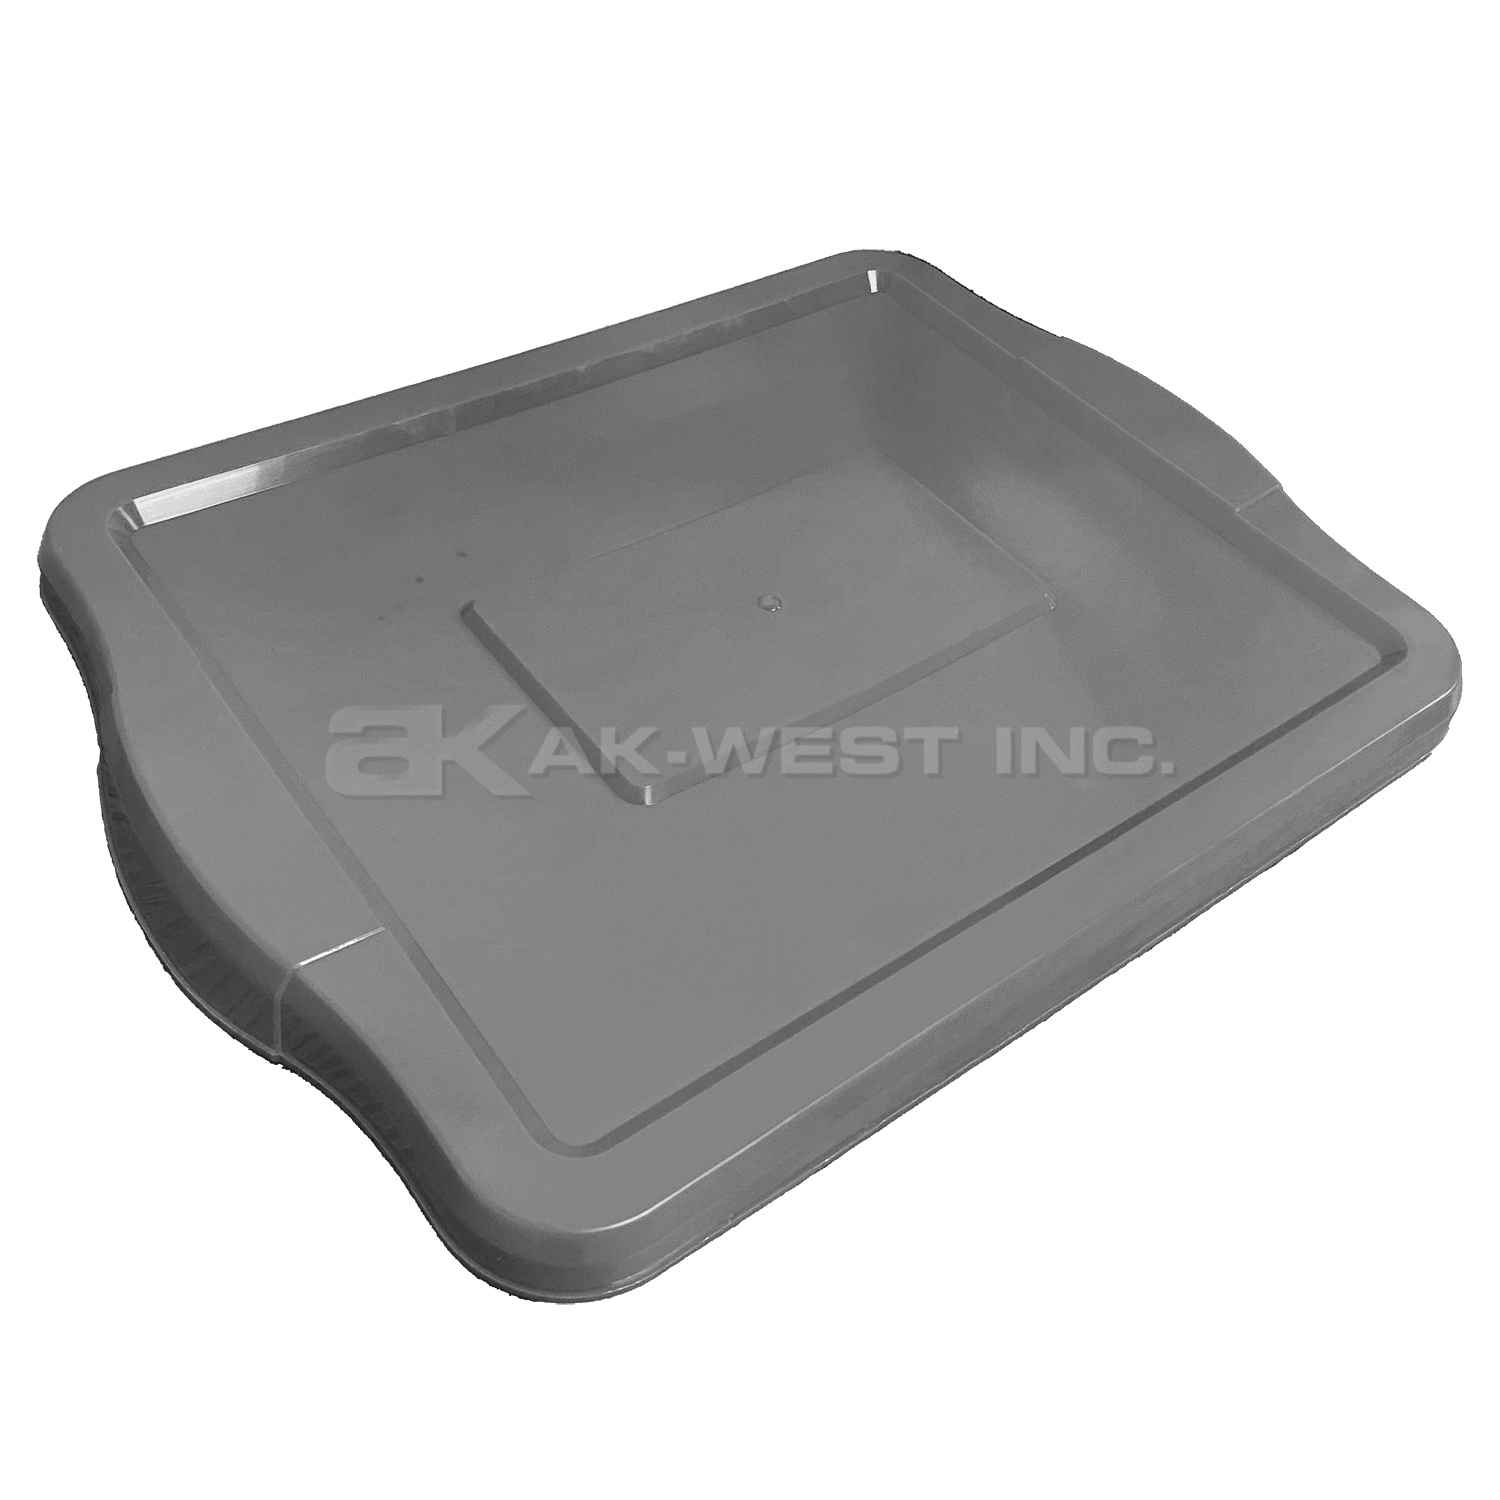 Grey, 19" x 15.5", Flat Storage Lid for N401600 and N402290 Recycling Containers